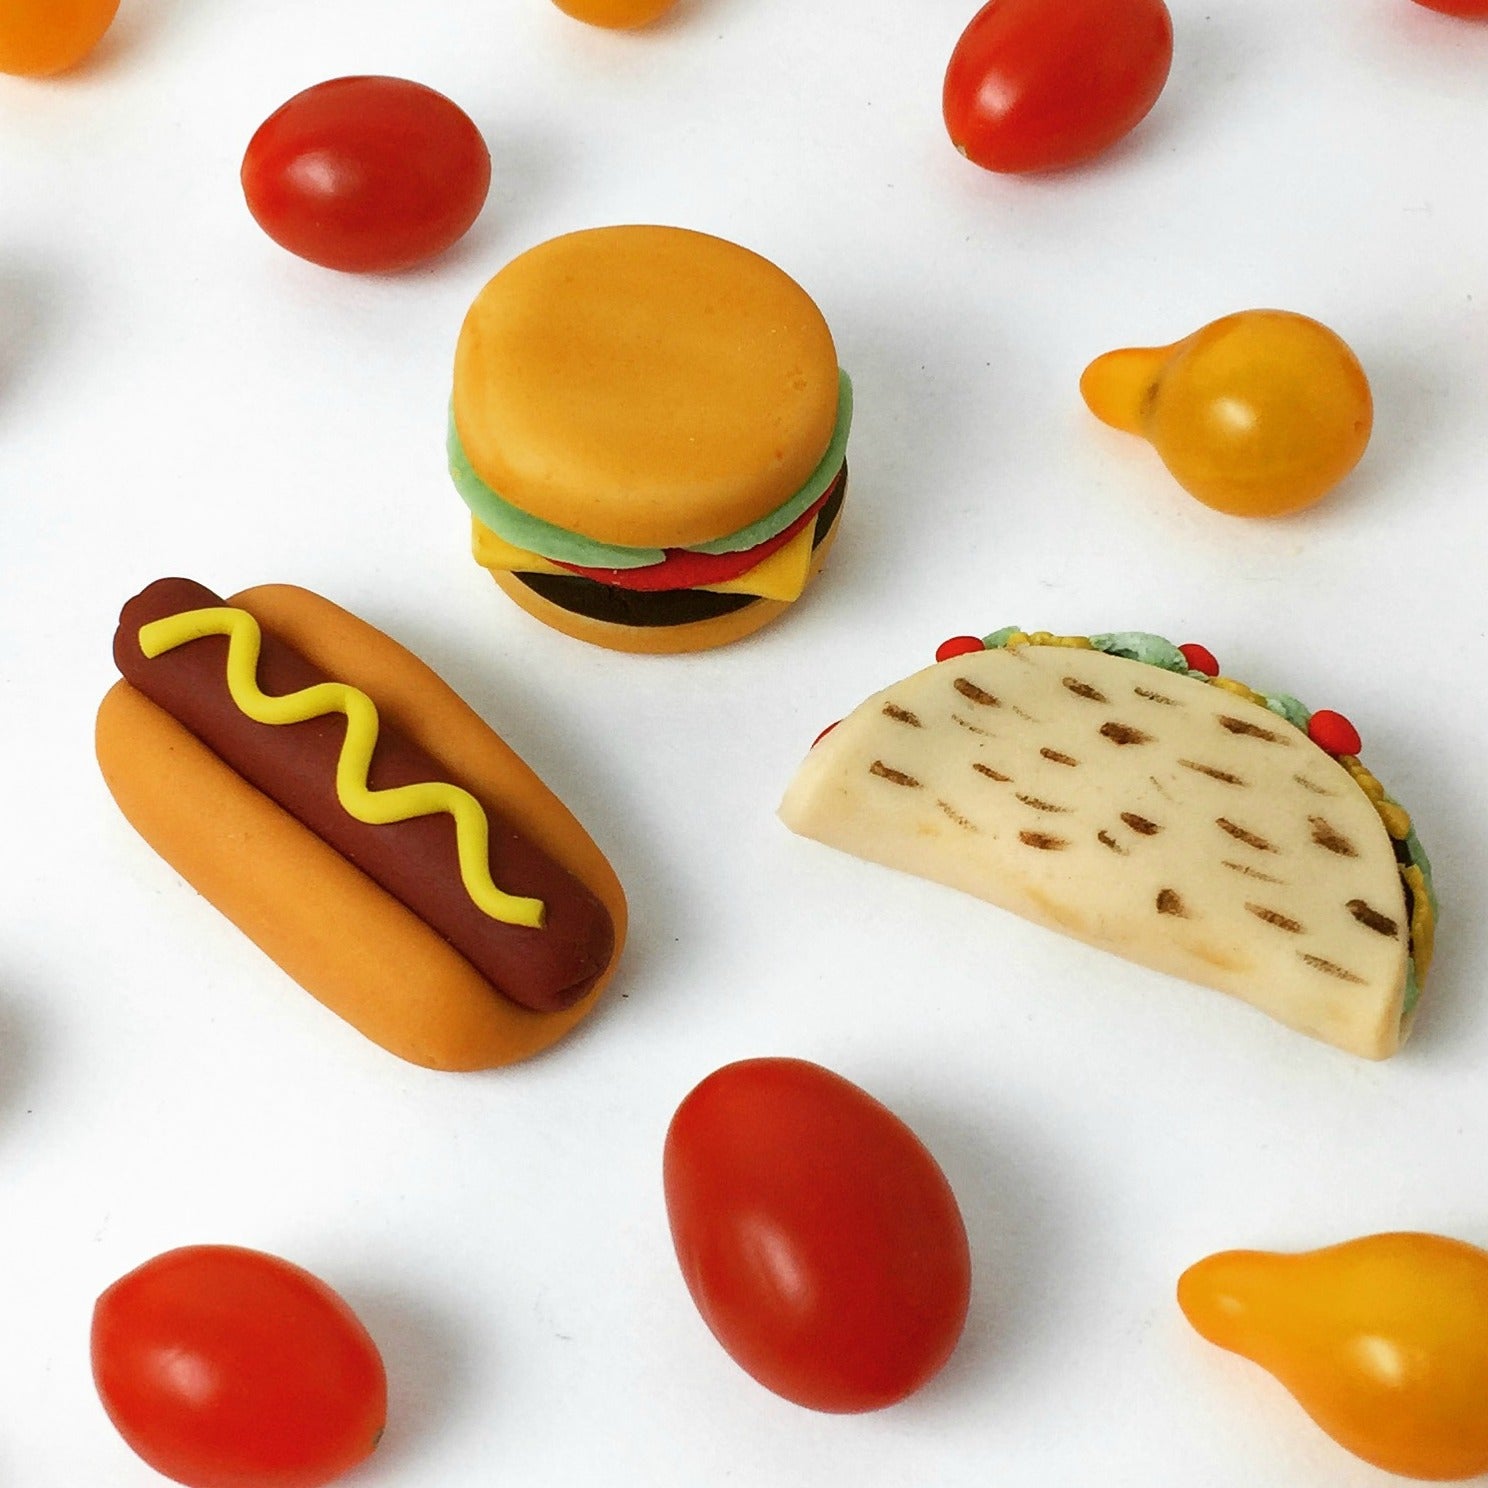 picnic foodie designs with taco, hamburger and hot dog marzipan candy sculpture treats